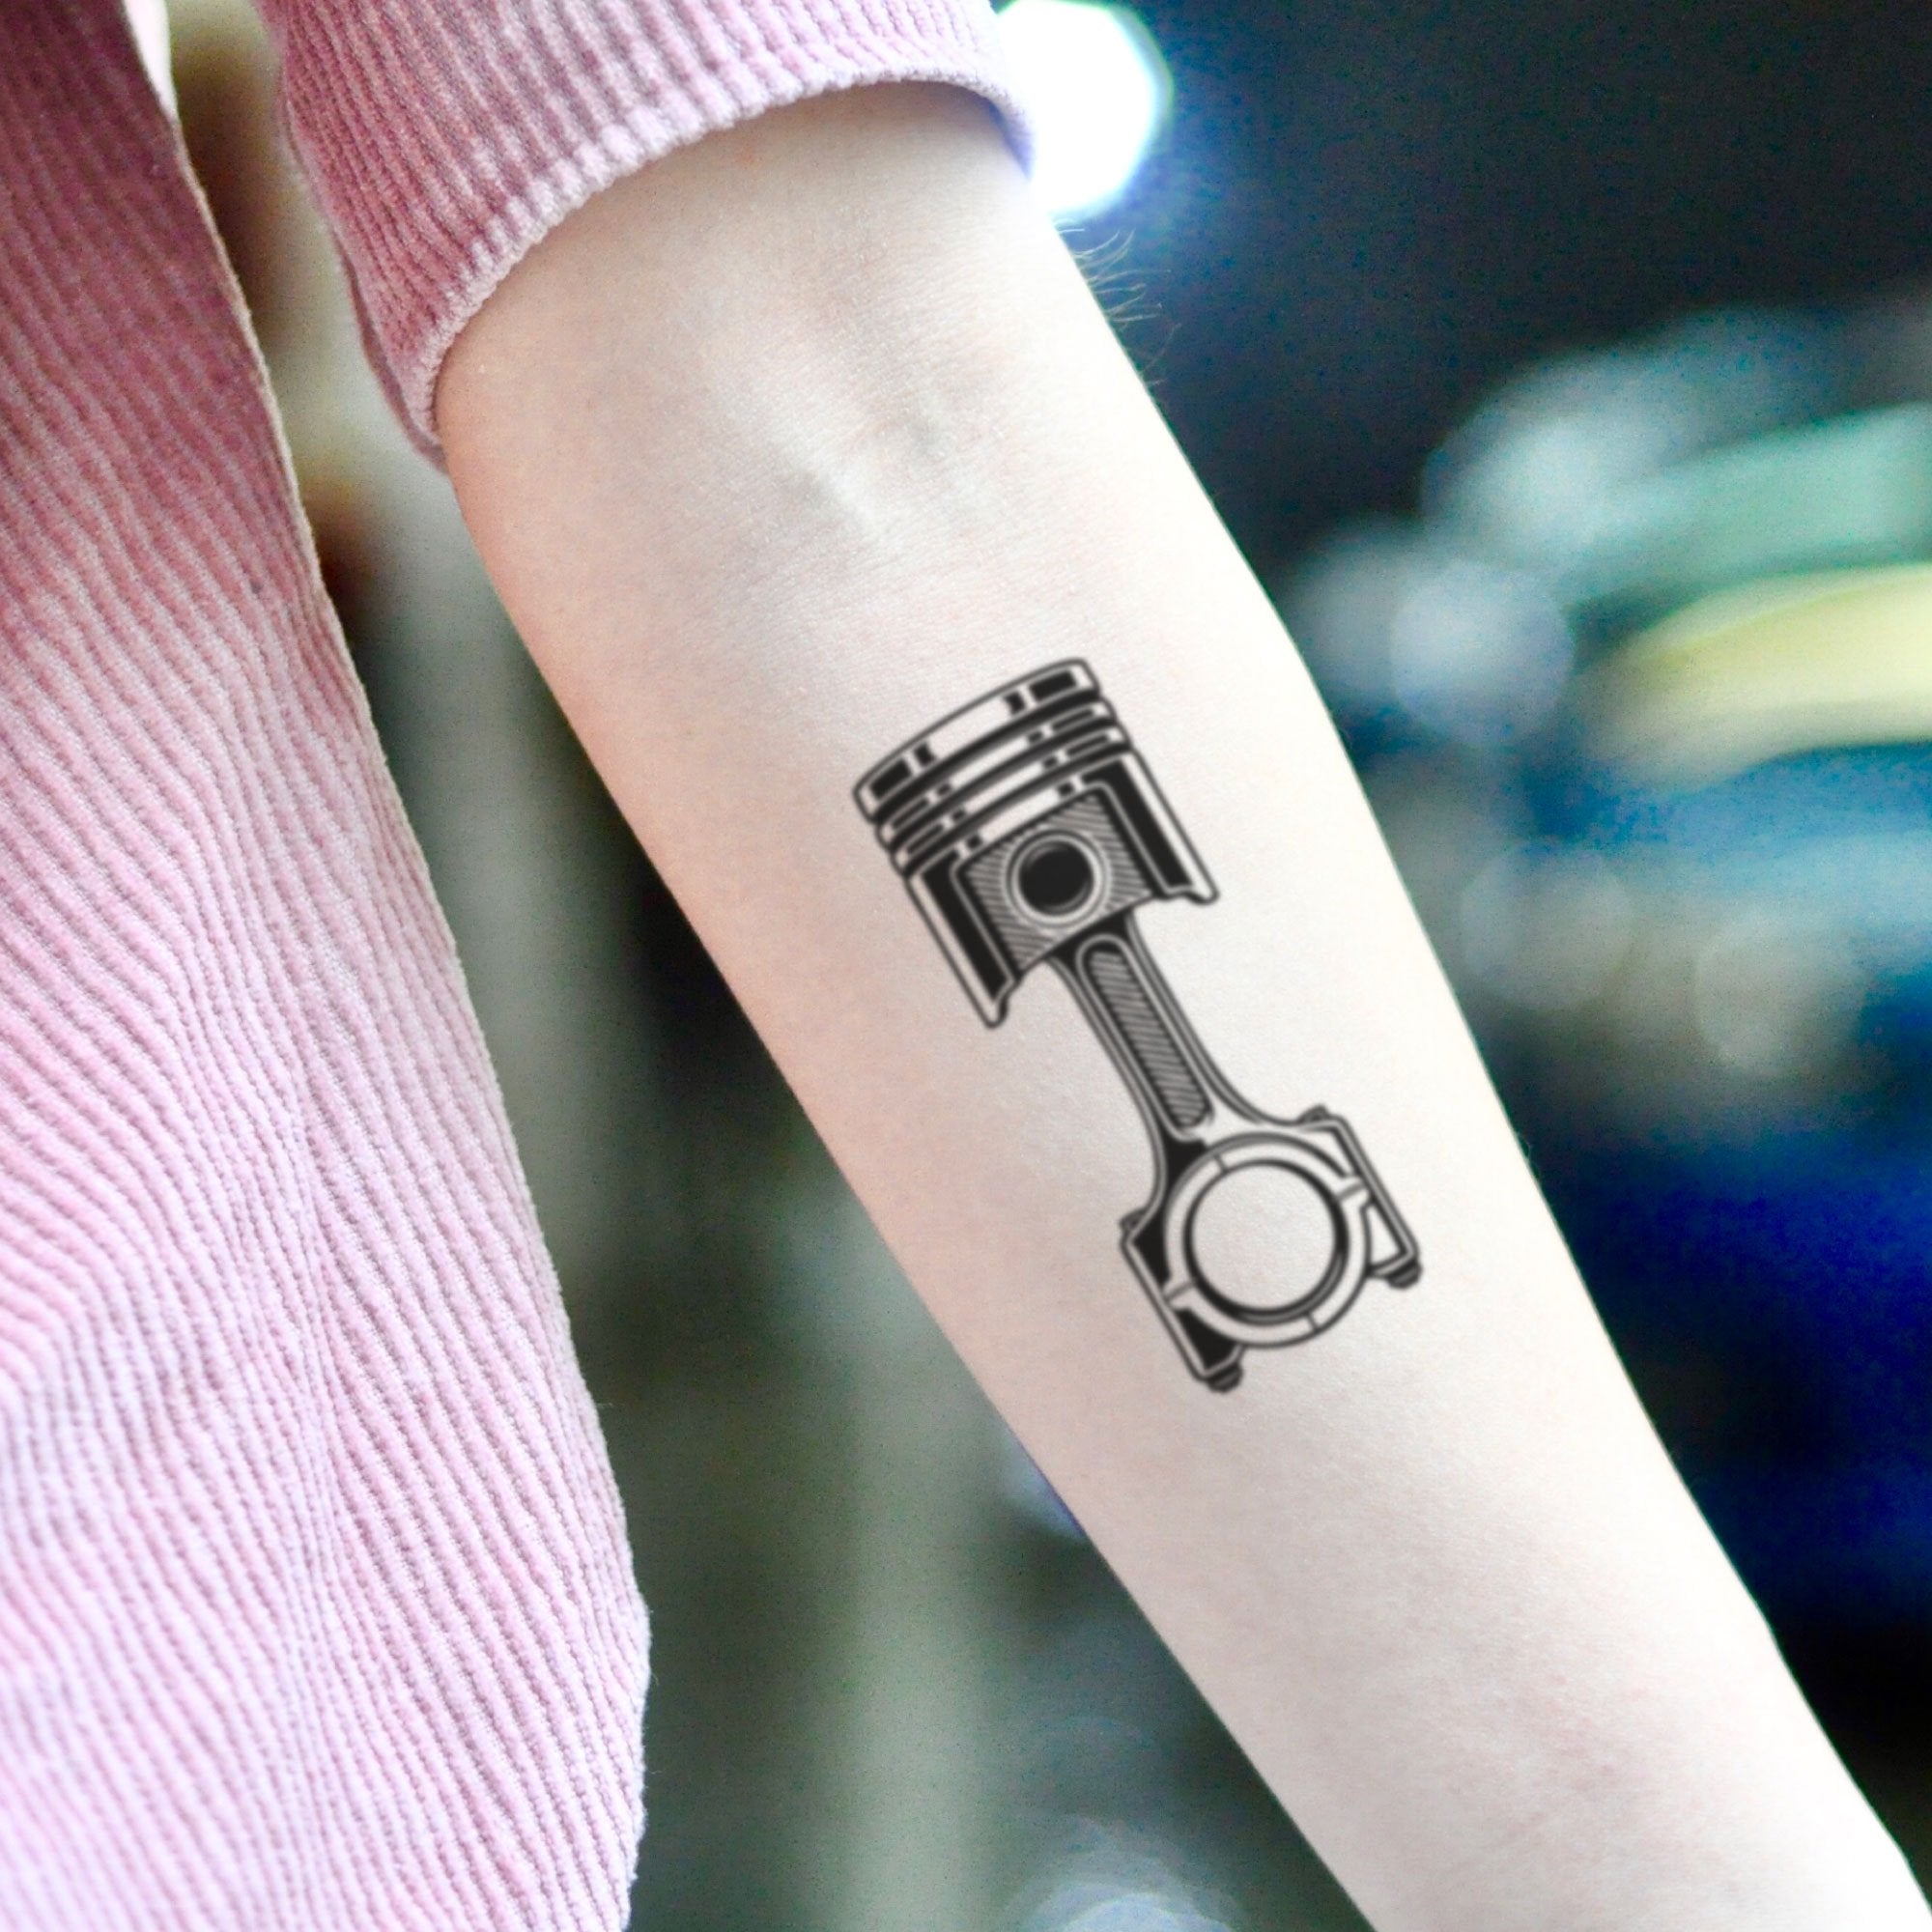 10+ Meaningful Tattoos With A Story Behind Them